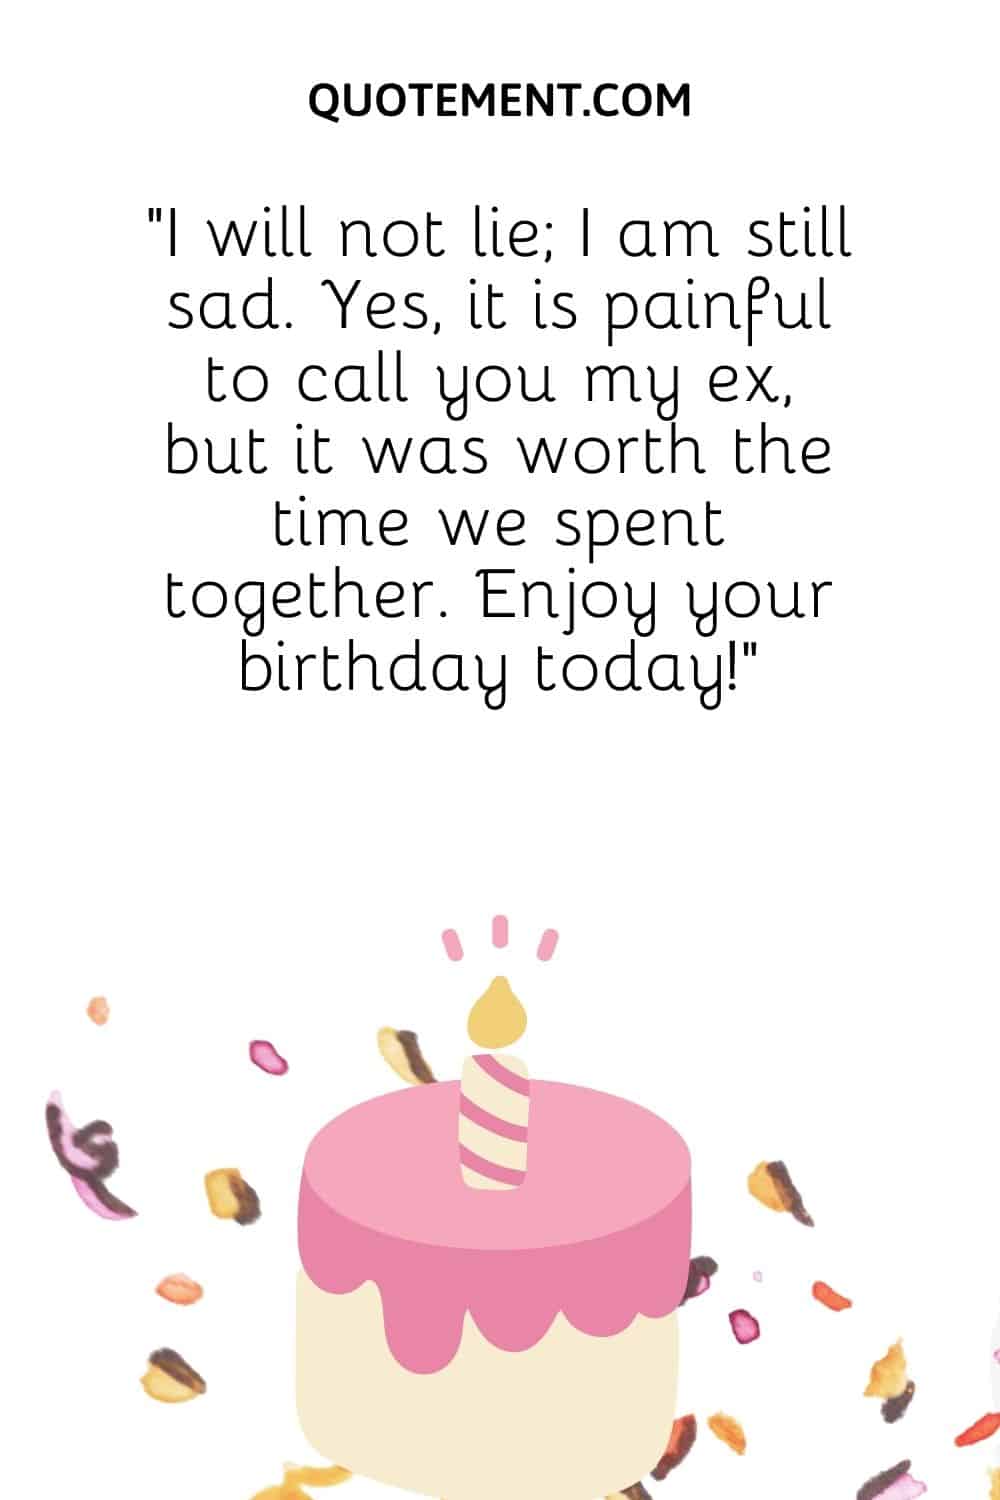 “I will not lie; I am still sad. Yes, it is painful to call you my ex, but it was worth the time we spent together. Enjoy your birthday today!”